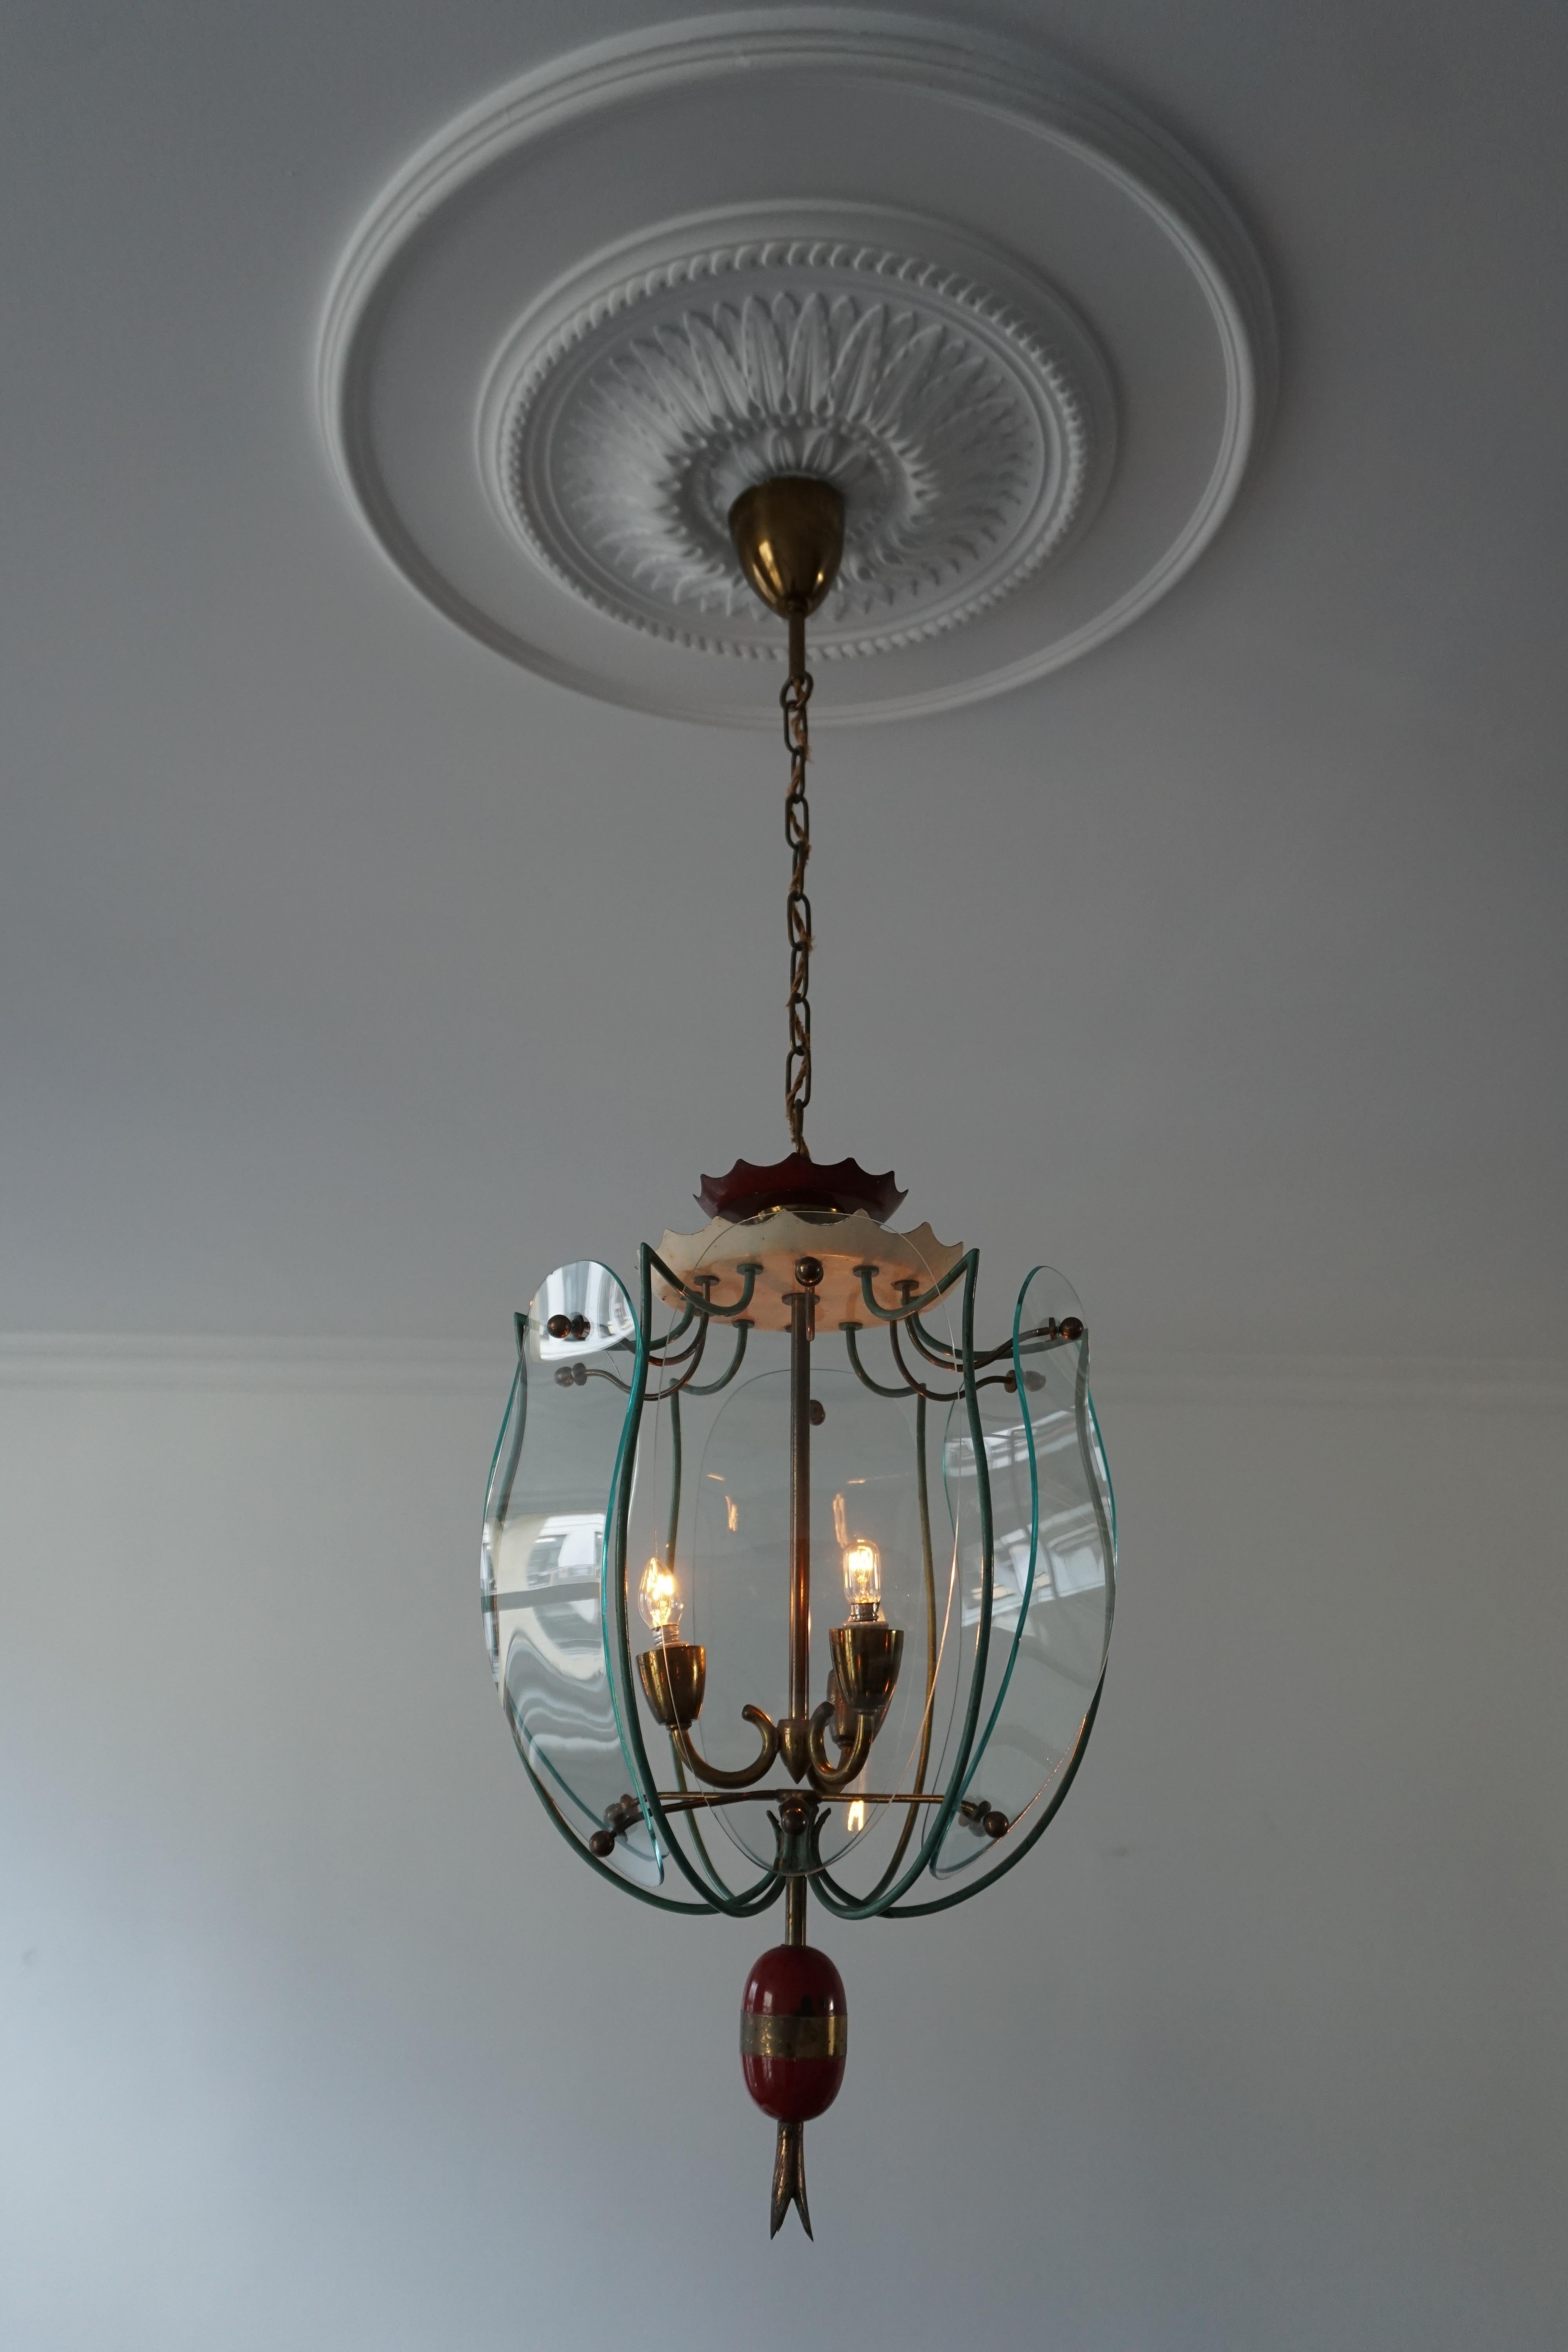 Beautiful elegant Italian 1950s ceiling lamp in brass and curved glass.

The light requires tree single E14 screw fit lightbulbs (60Watt max.) LED compatible.

Measures: Diameter 30 cm.
Height fixture 50 cm.
Total height 95 cm.